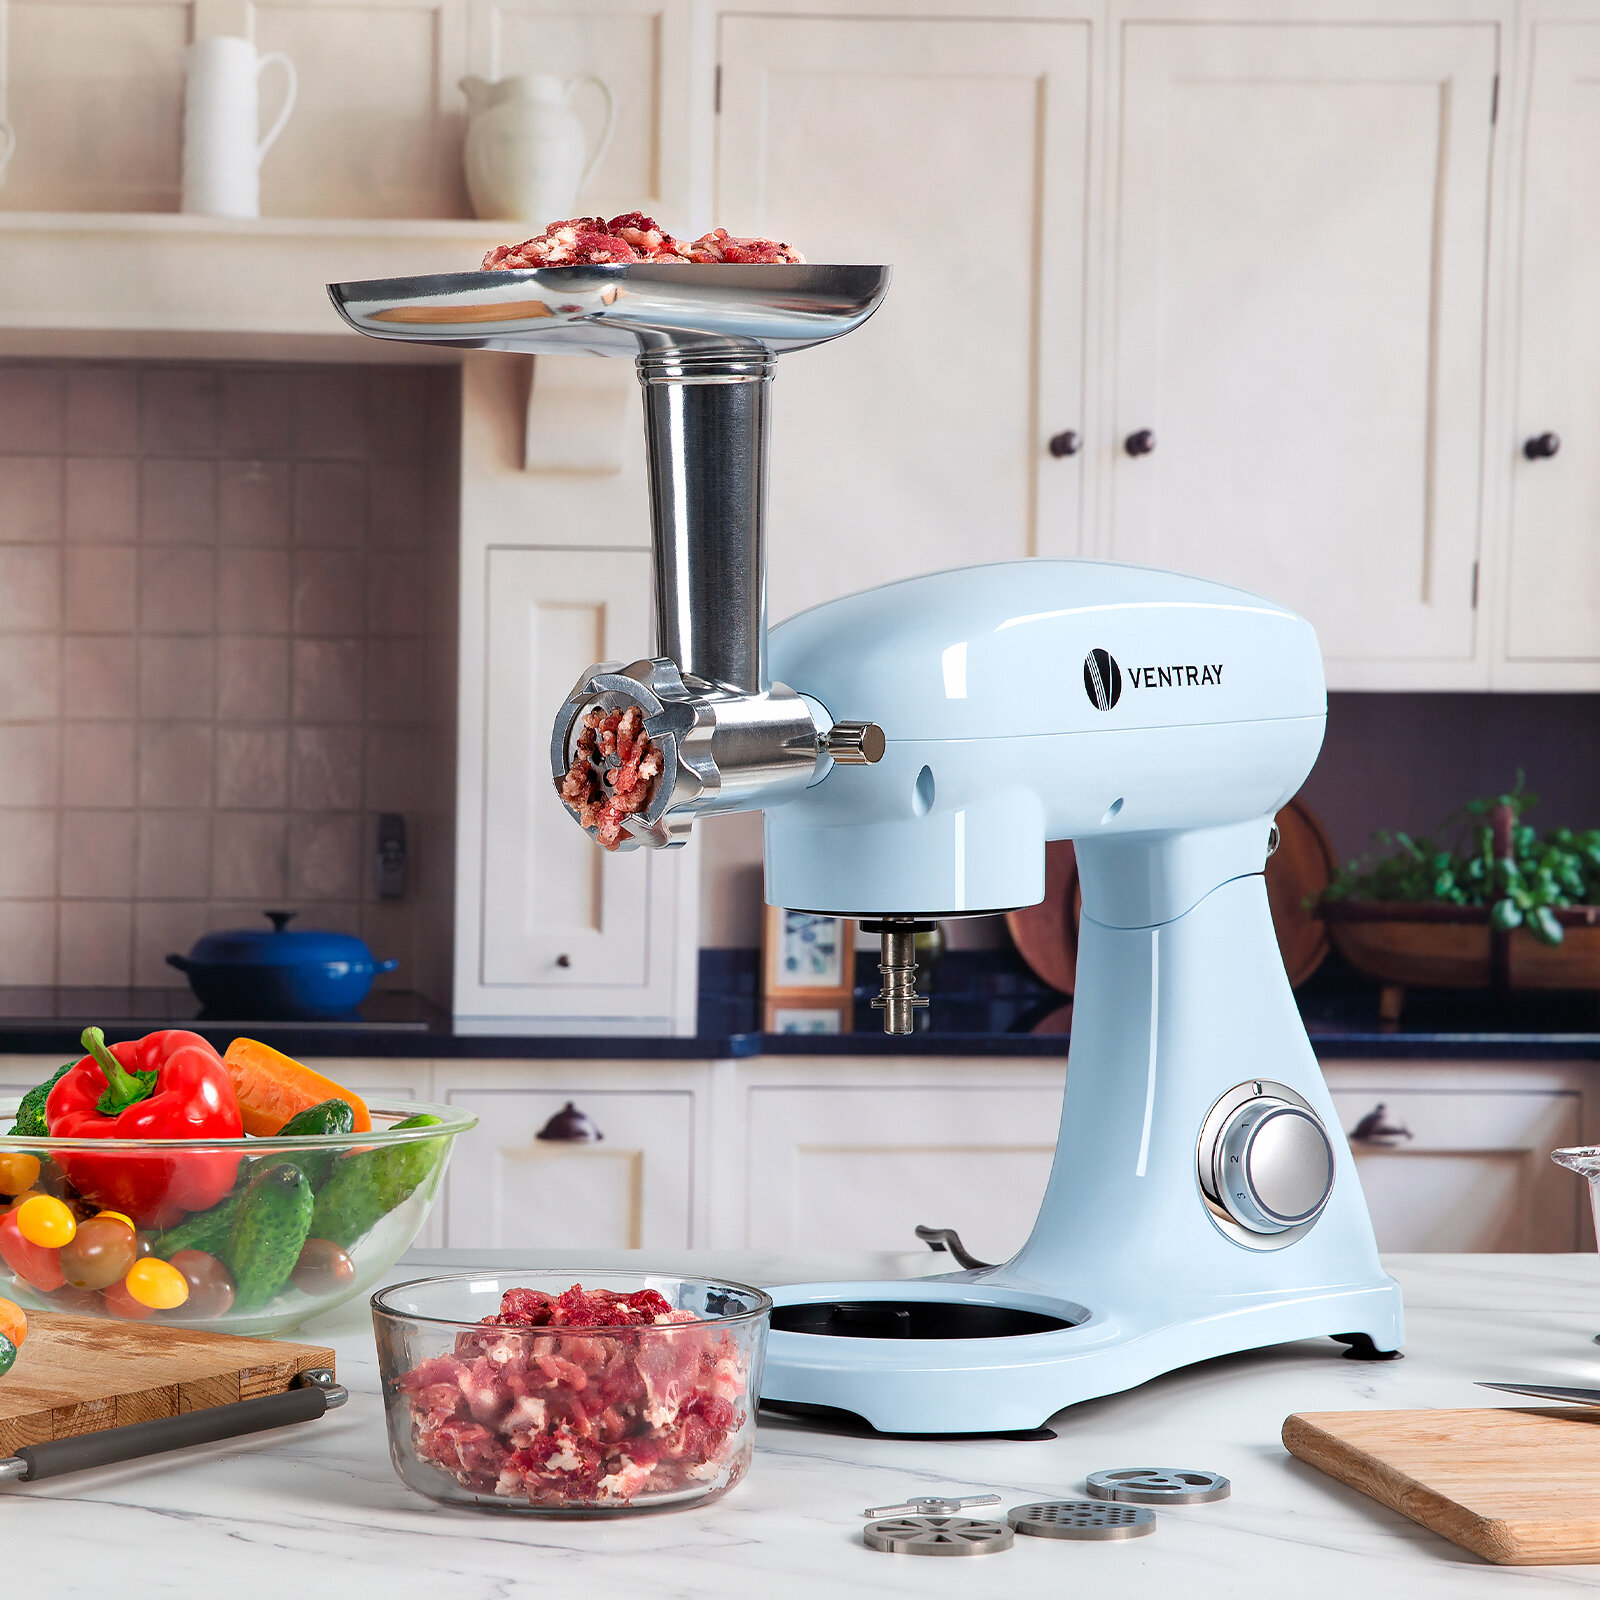 Metal Food Grinder Attachment for KitchenAid Stand Mixers, Kitchen aid Meat  Grinder Included 3 Sausage Stuffer Tubes, 4 Grinding Plates, 2 Grinding  Blades, Kubbe Meat Processor Accessories (does not include kitchenaid stand